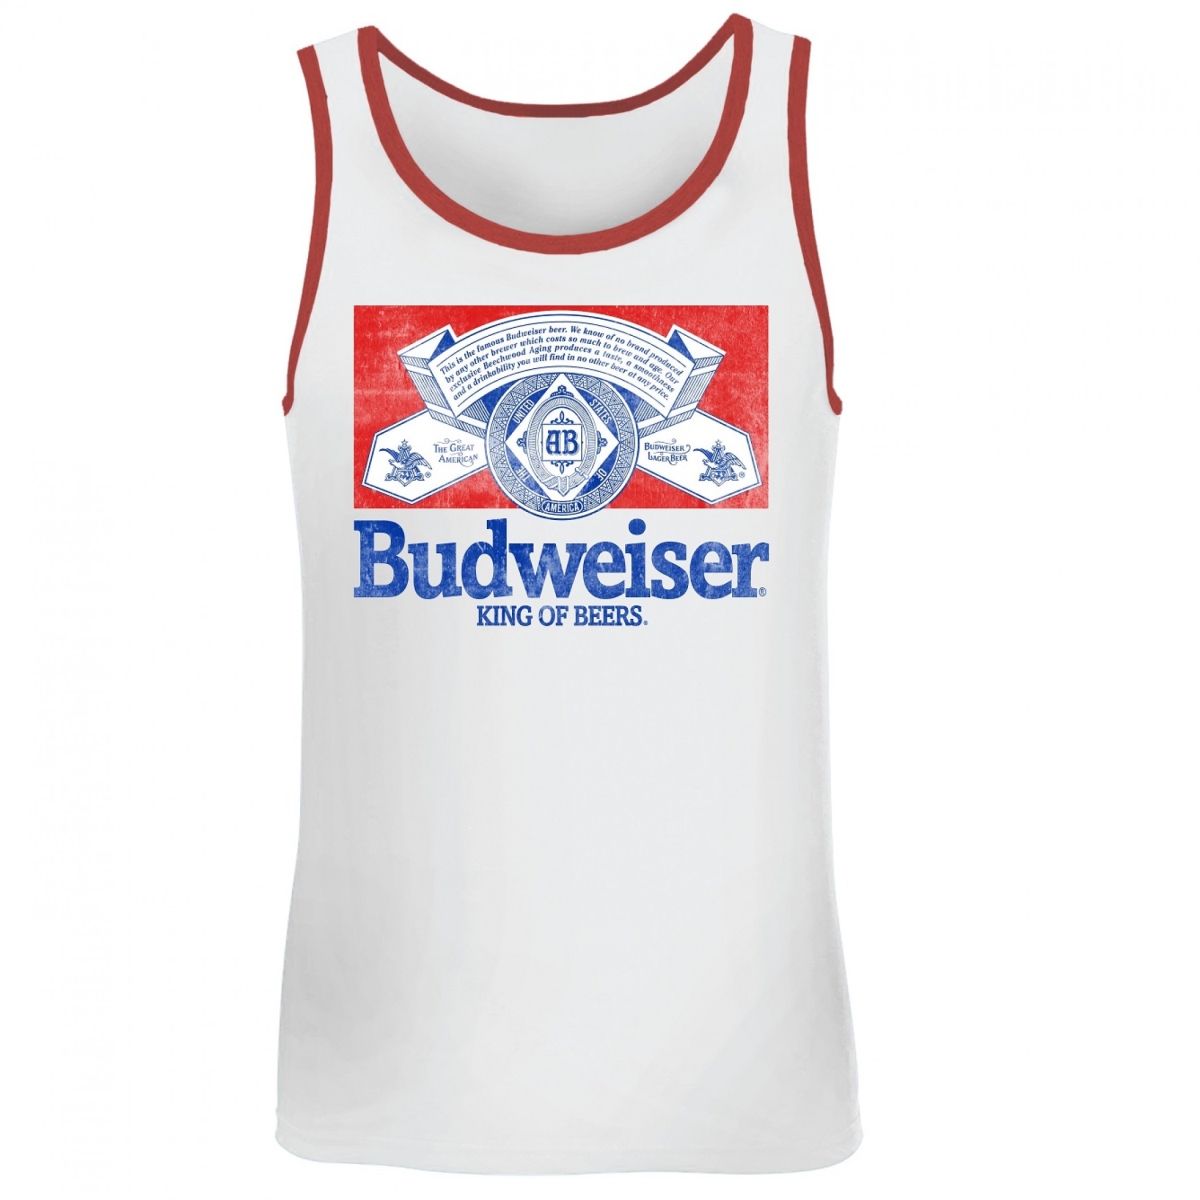 Budweiser 819959-2xlarge Mens King of Beers Red Trim Tank Top, White - 2XL